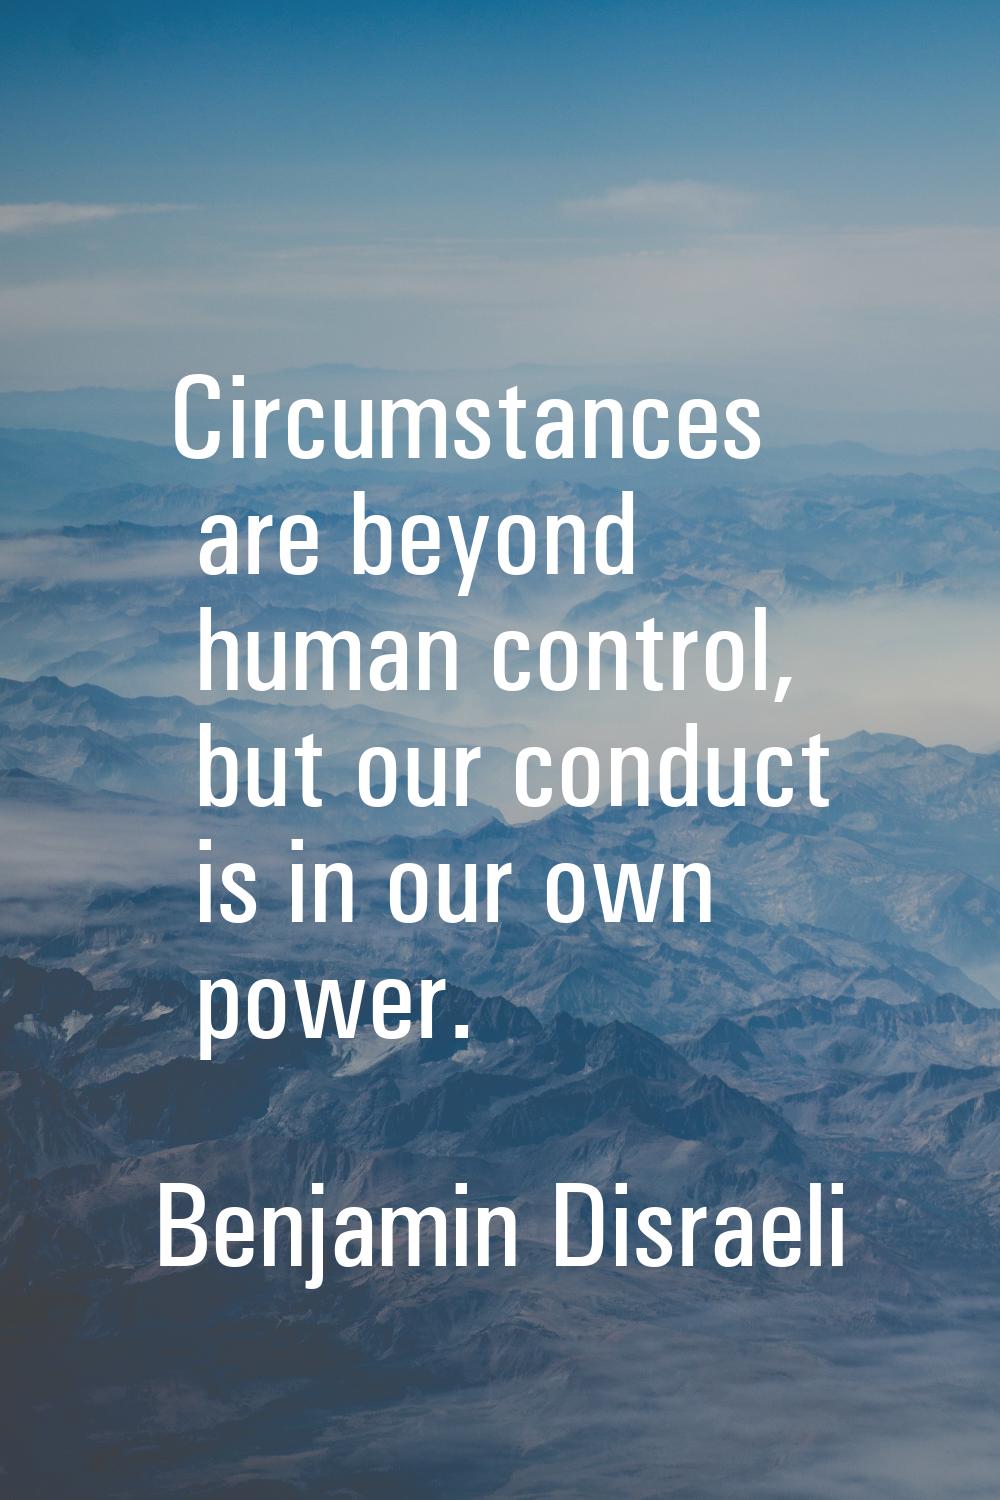 Circumstances are beyond human control, but our conduct is in our own power.